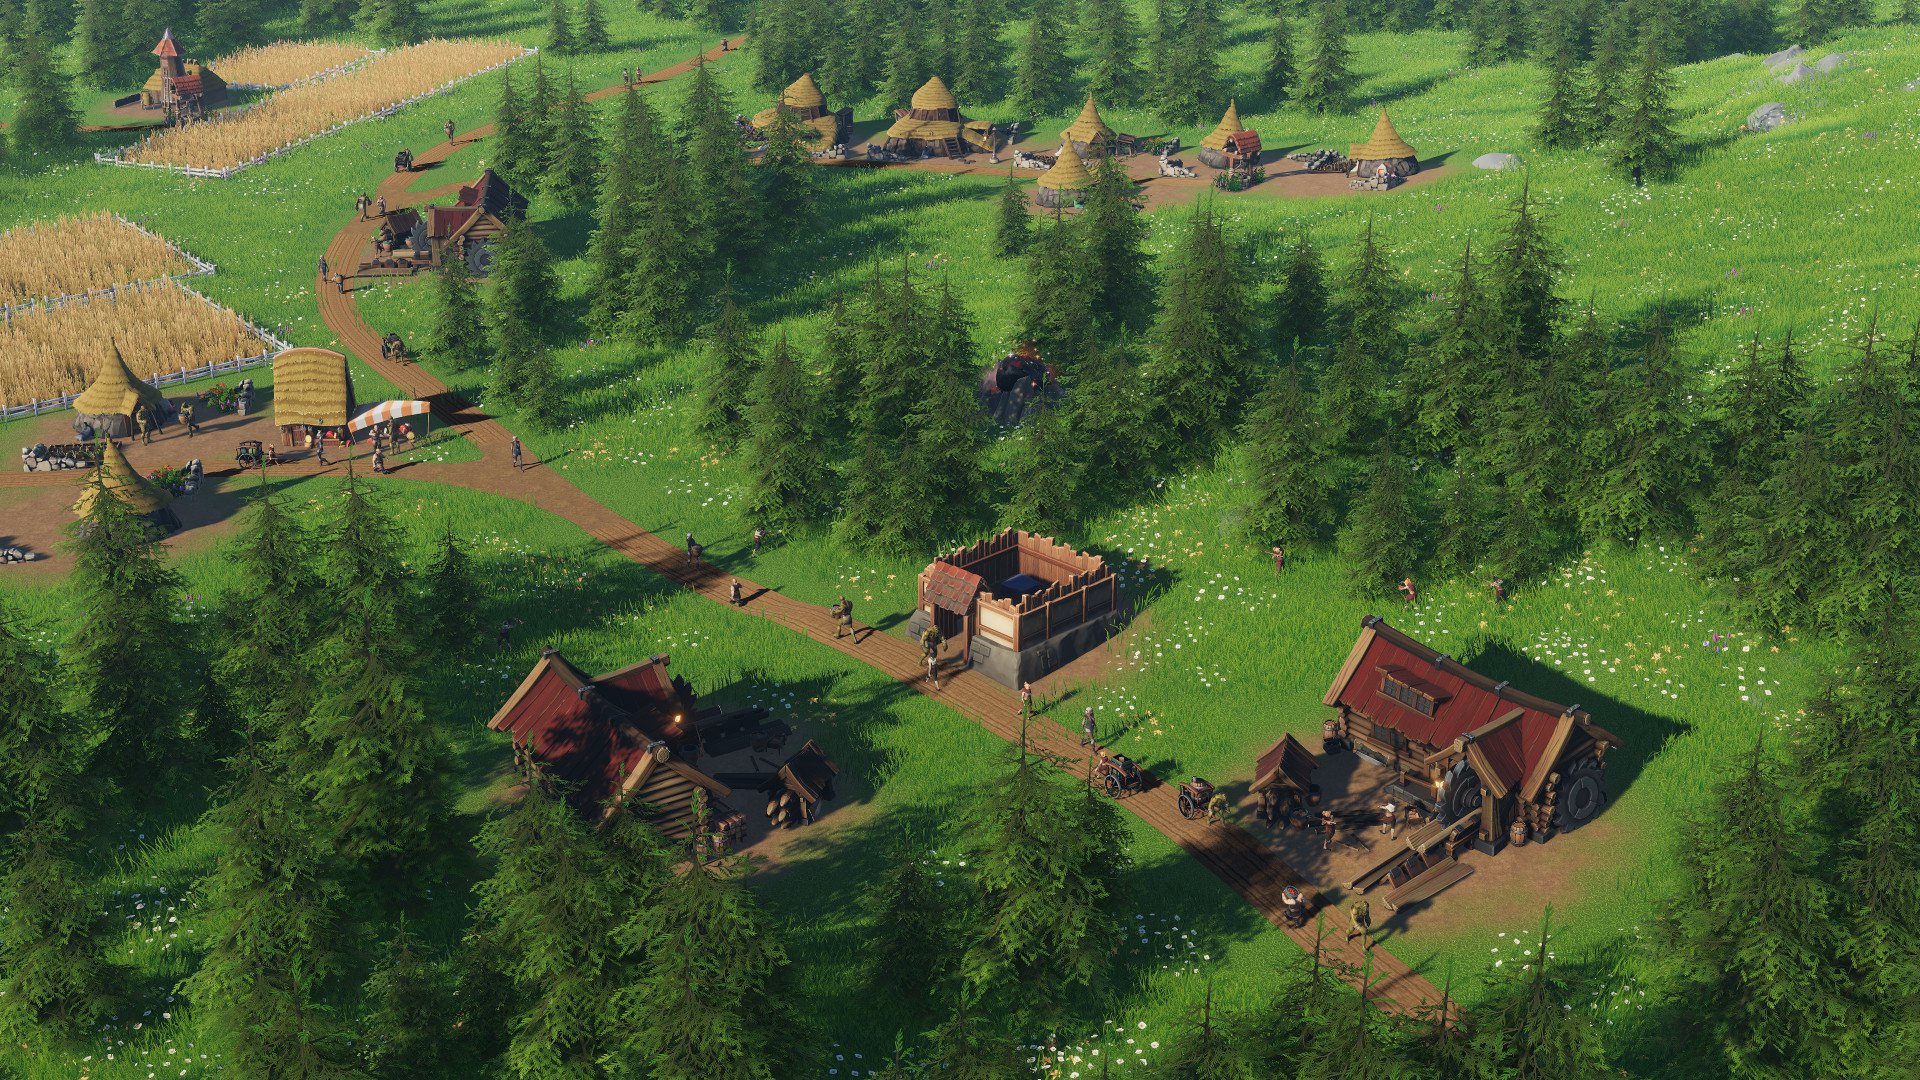 Distant Kingdoms Announced For Release on PC In 2020, Build Your Civilization In A Rich Fantasy World